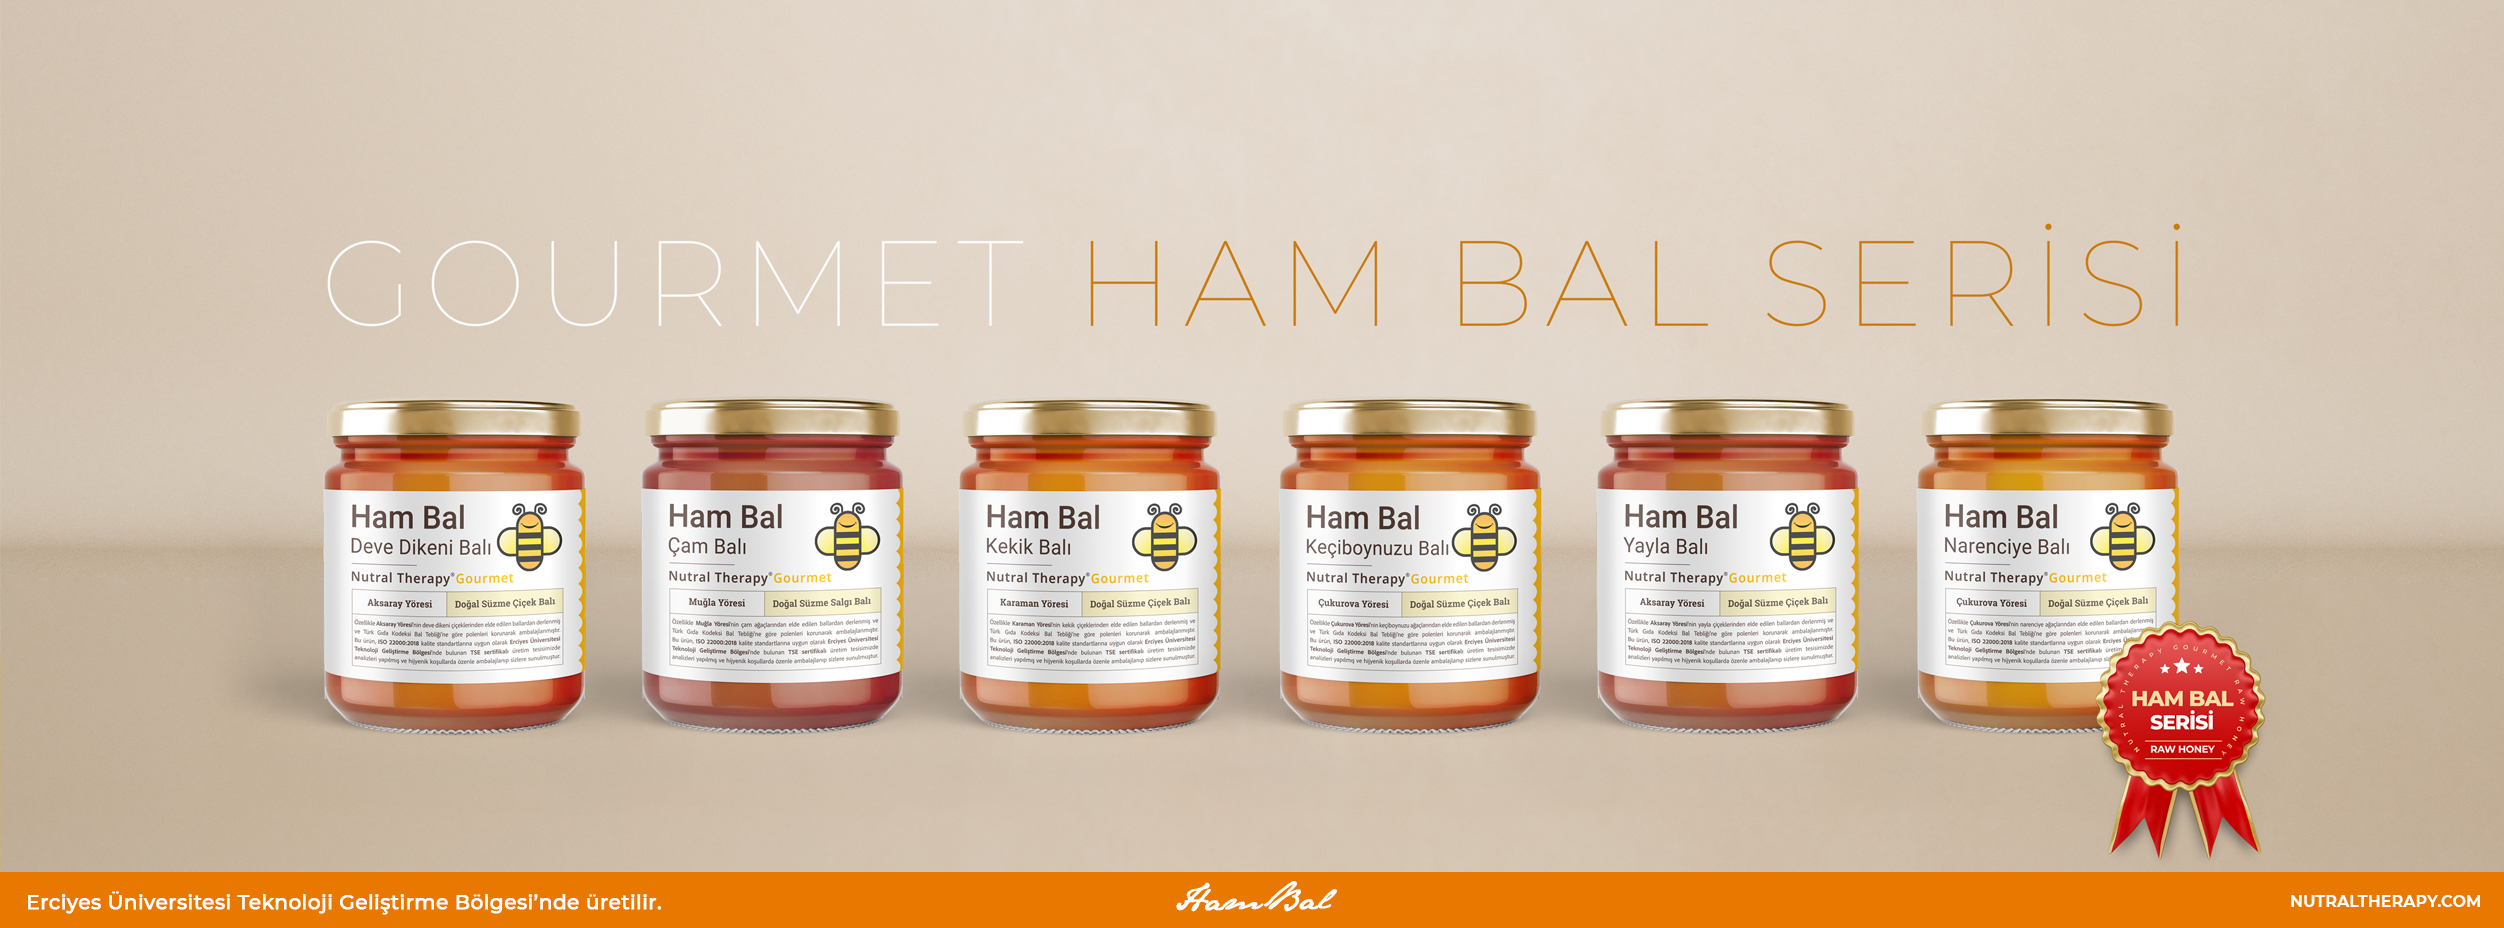 Nutral Therapy Ham Bal